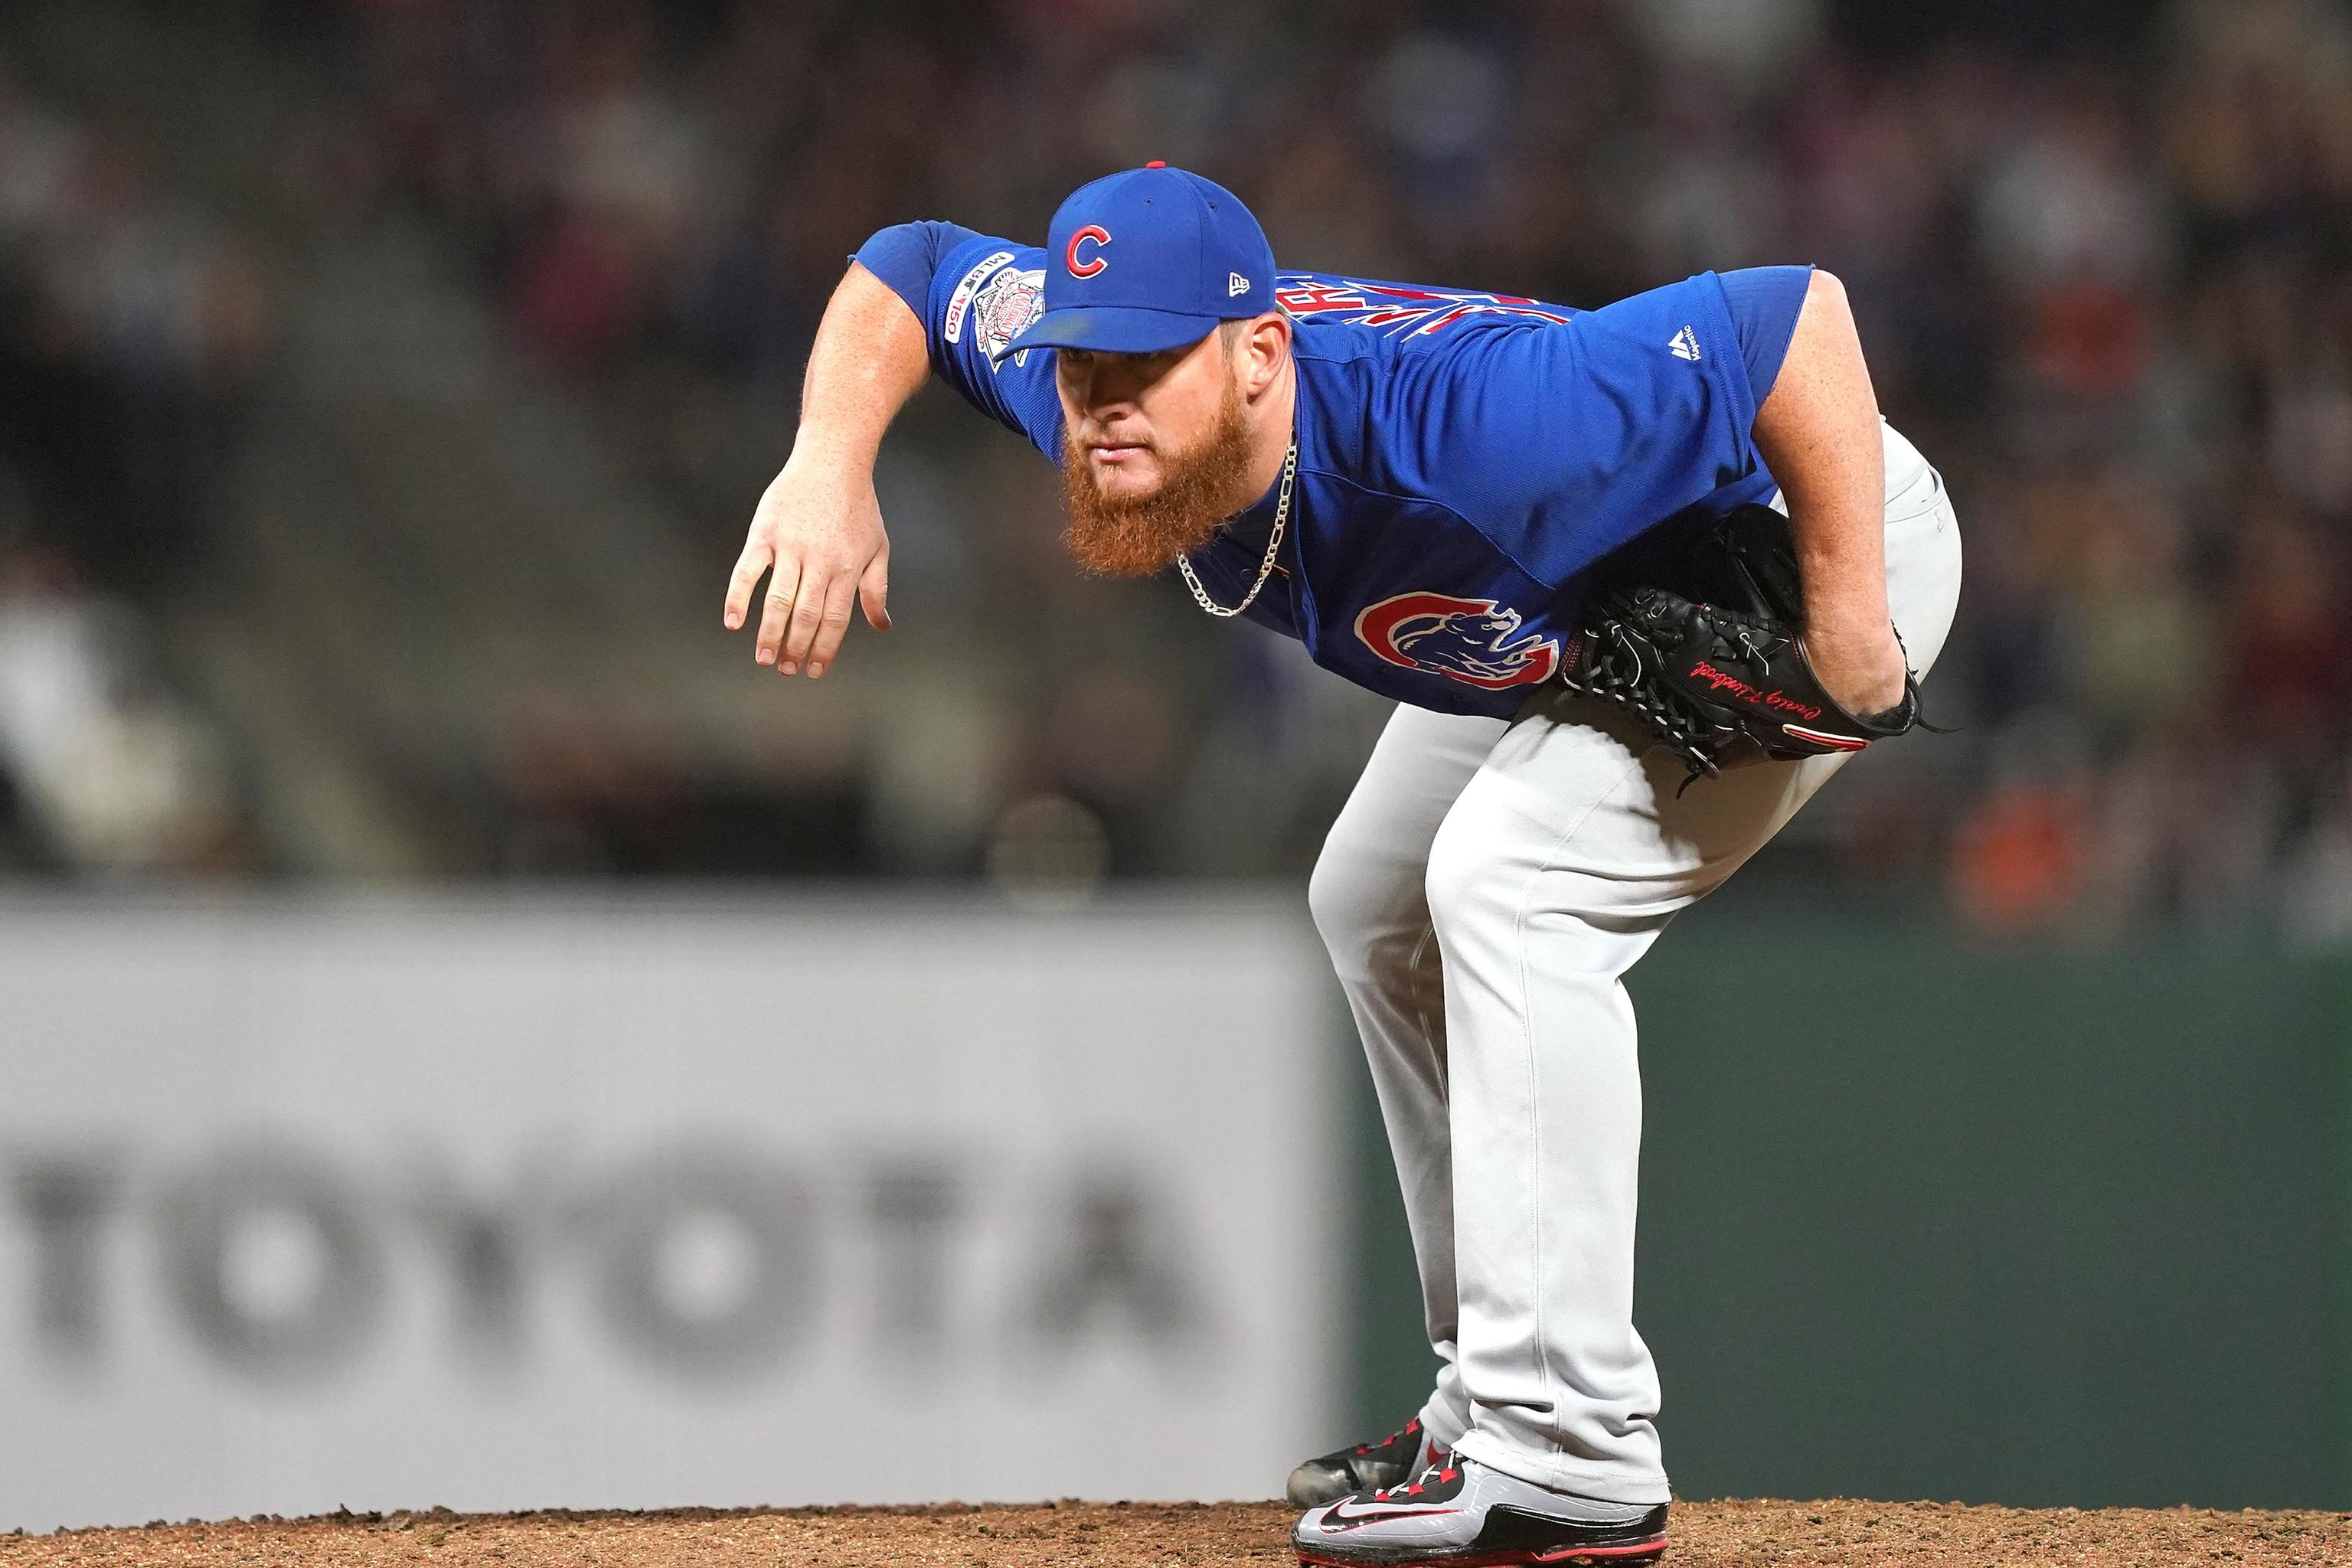 Craig Kimbrel no longer with Iowa Cubs, signs point to imminent